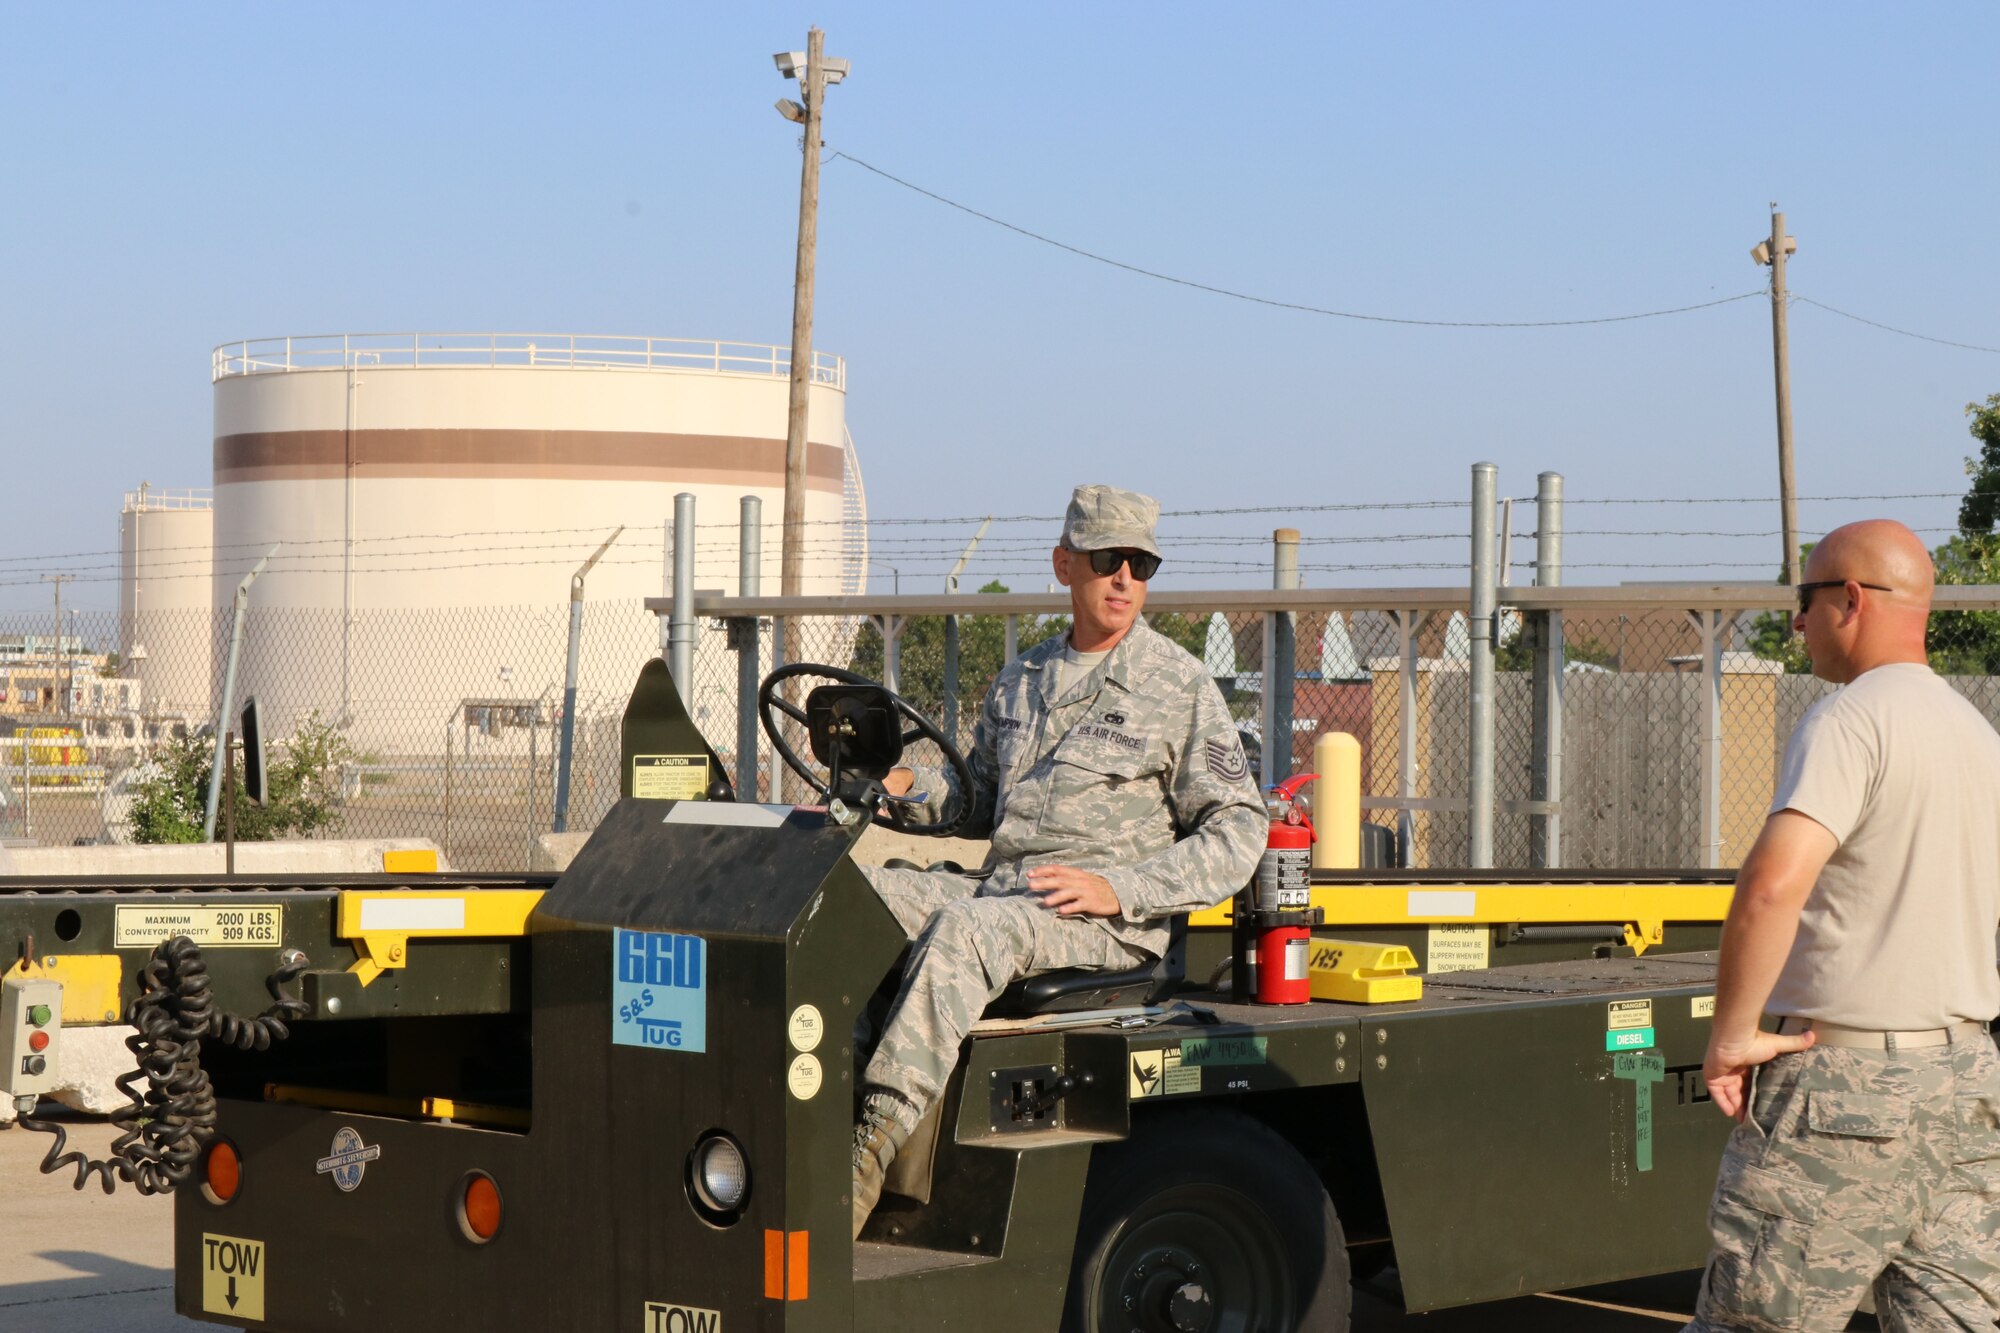 Tech. Sgt. Chis Thompson, 72nd Aerial Port Squadron aerial transportation specialist, drives a baggage belt vehicle during a rodeo, Sept. 6, 2019, at Tinker Air Force Base, Oklahoma. The rodeo incorporated various jobs competed by aerial port in a fun and competitive atmosphere. (U.S. Air Force photo by Senior Airman Mary Begy)